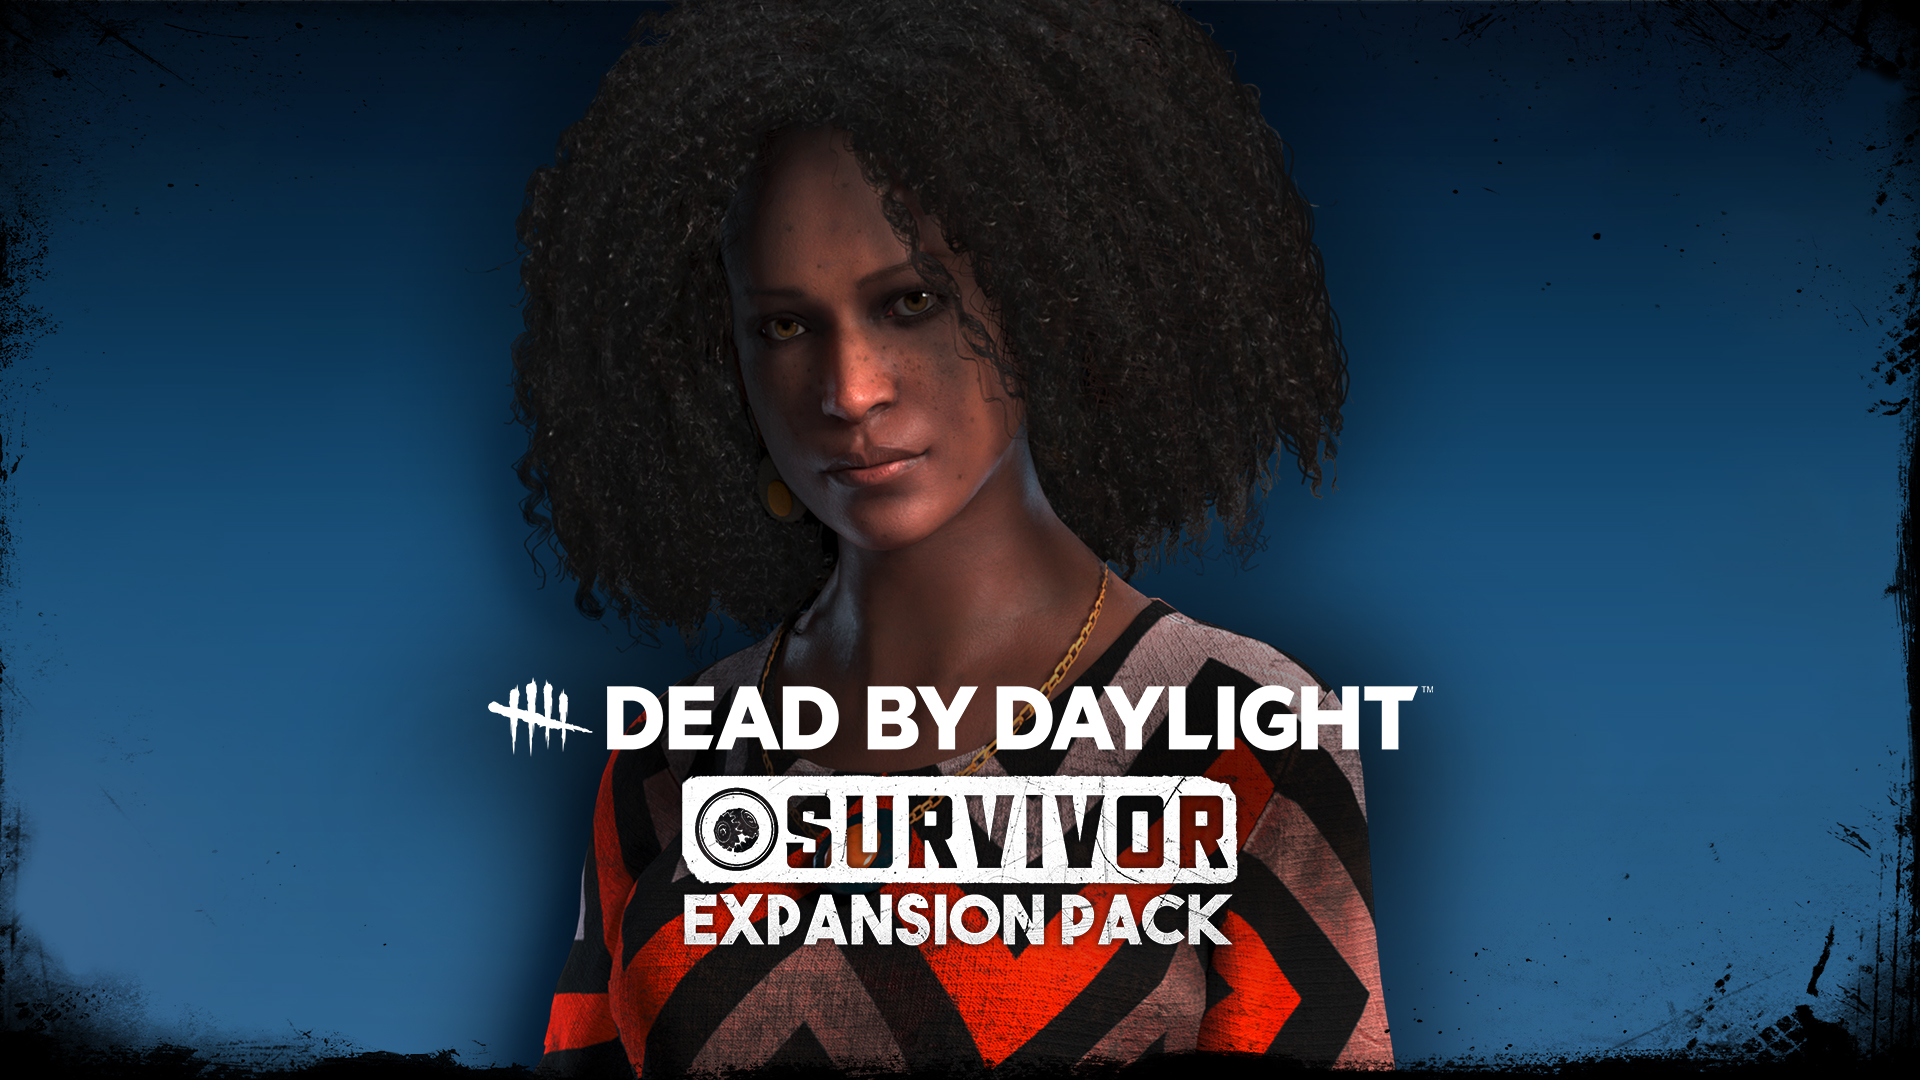 Dead by Daylight: SURVIVOR EXPANSION PACK